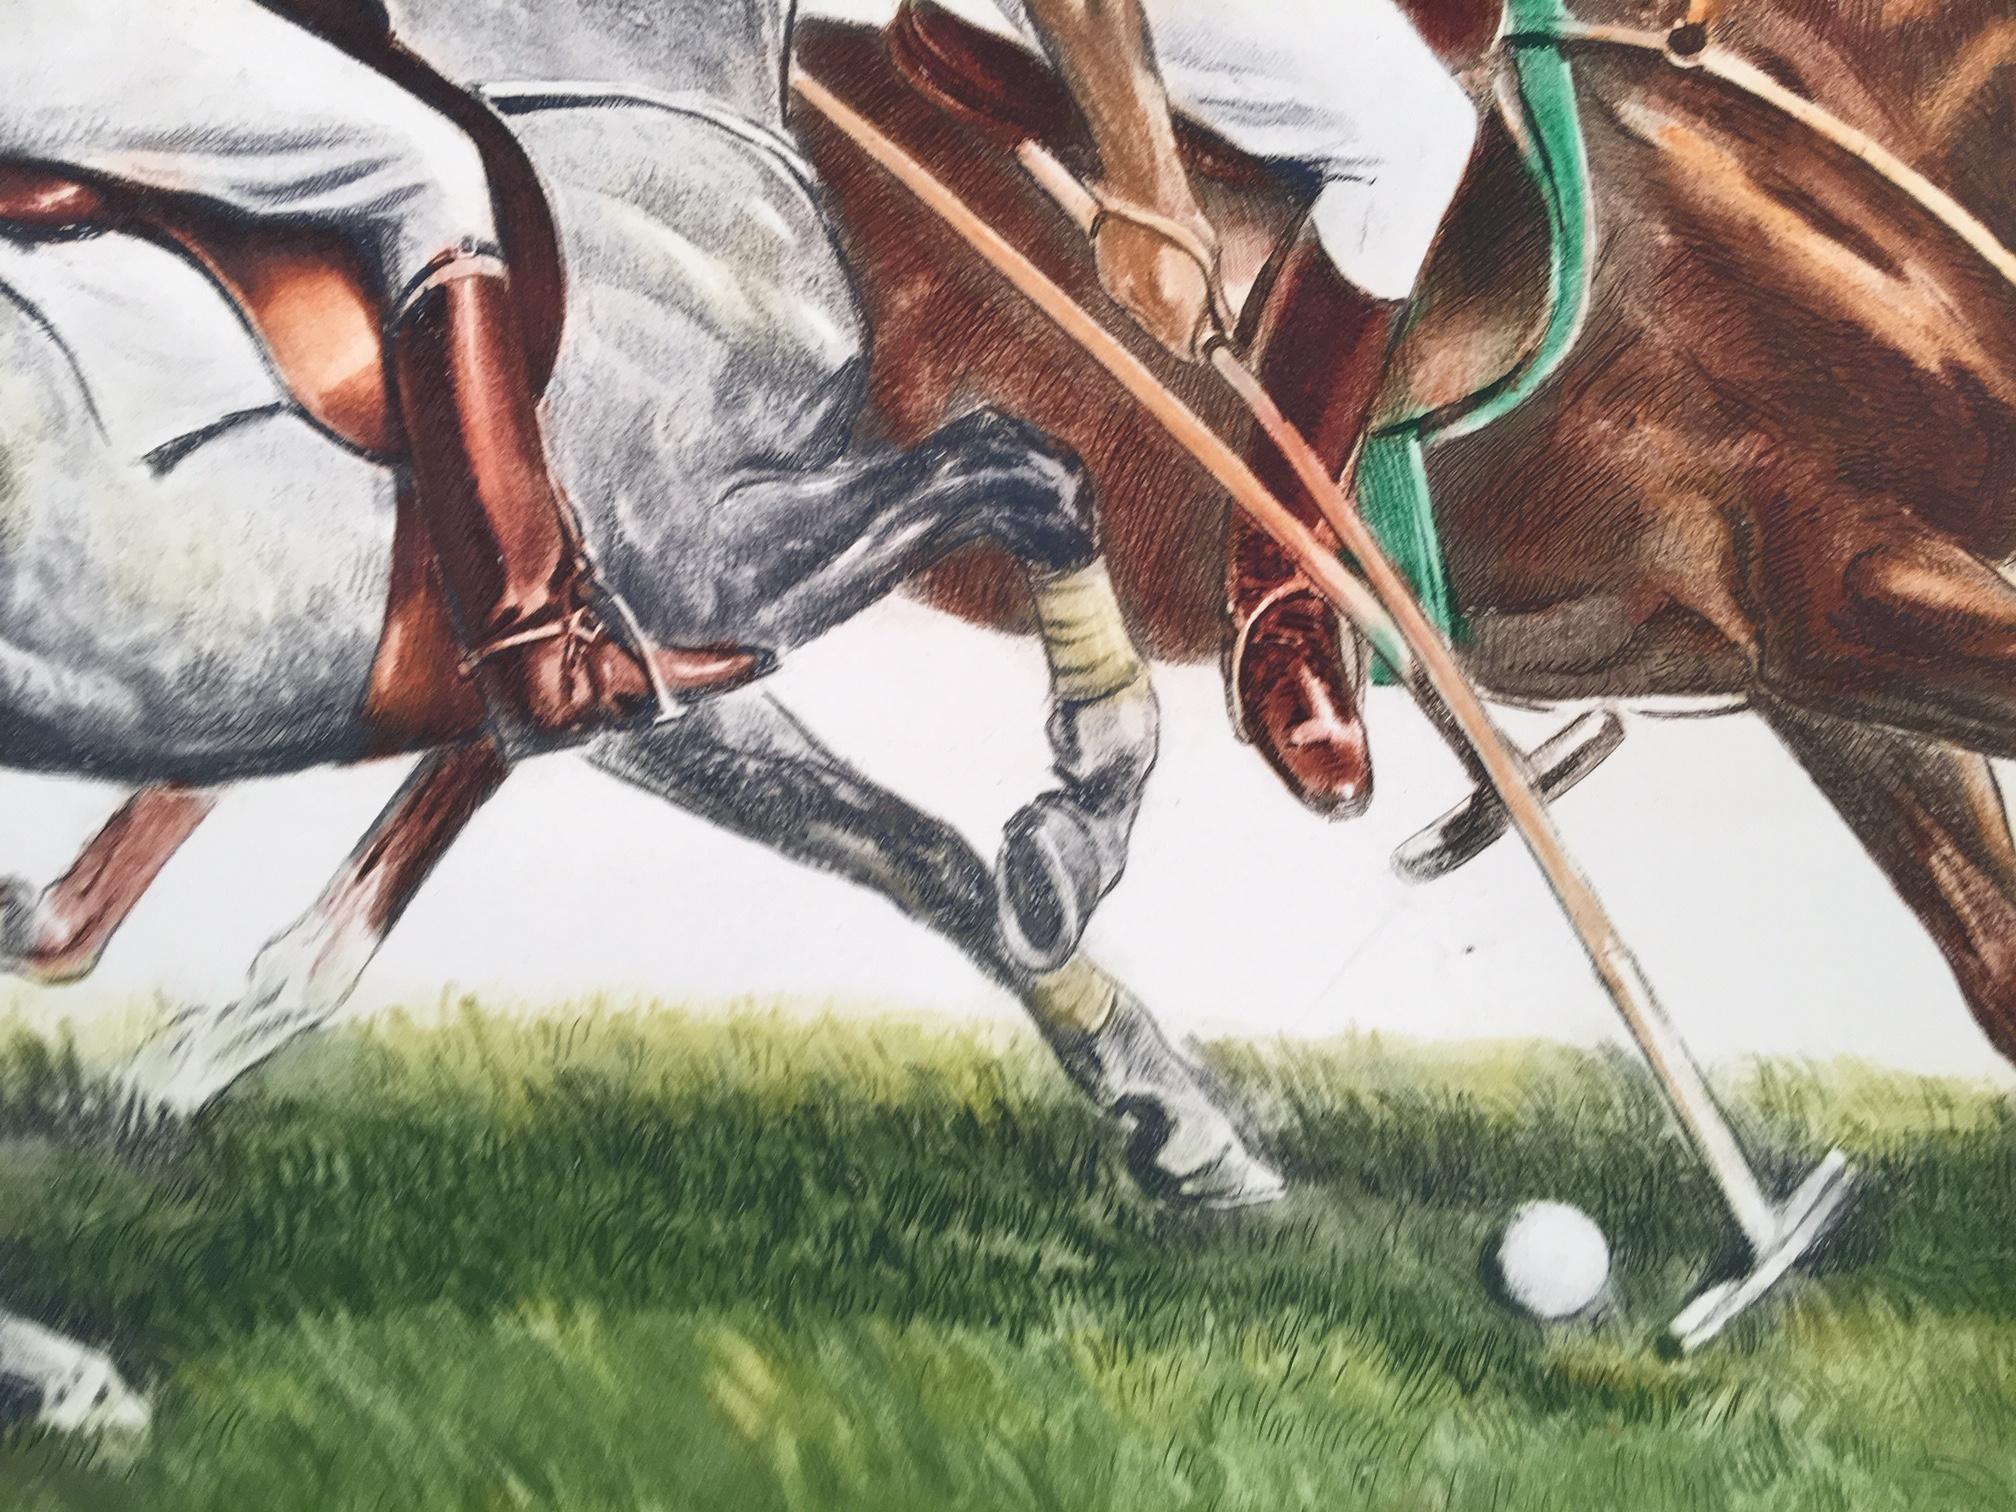 Polo Riders in Duel for the Ball 2